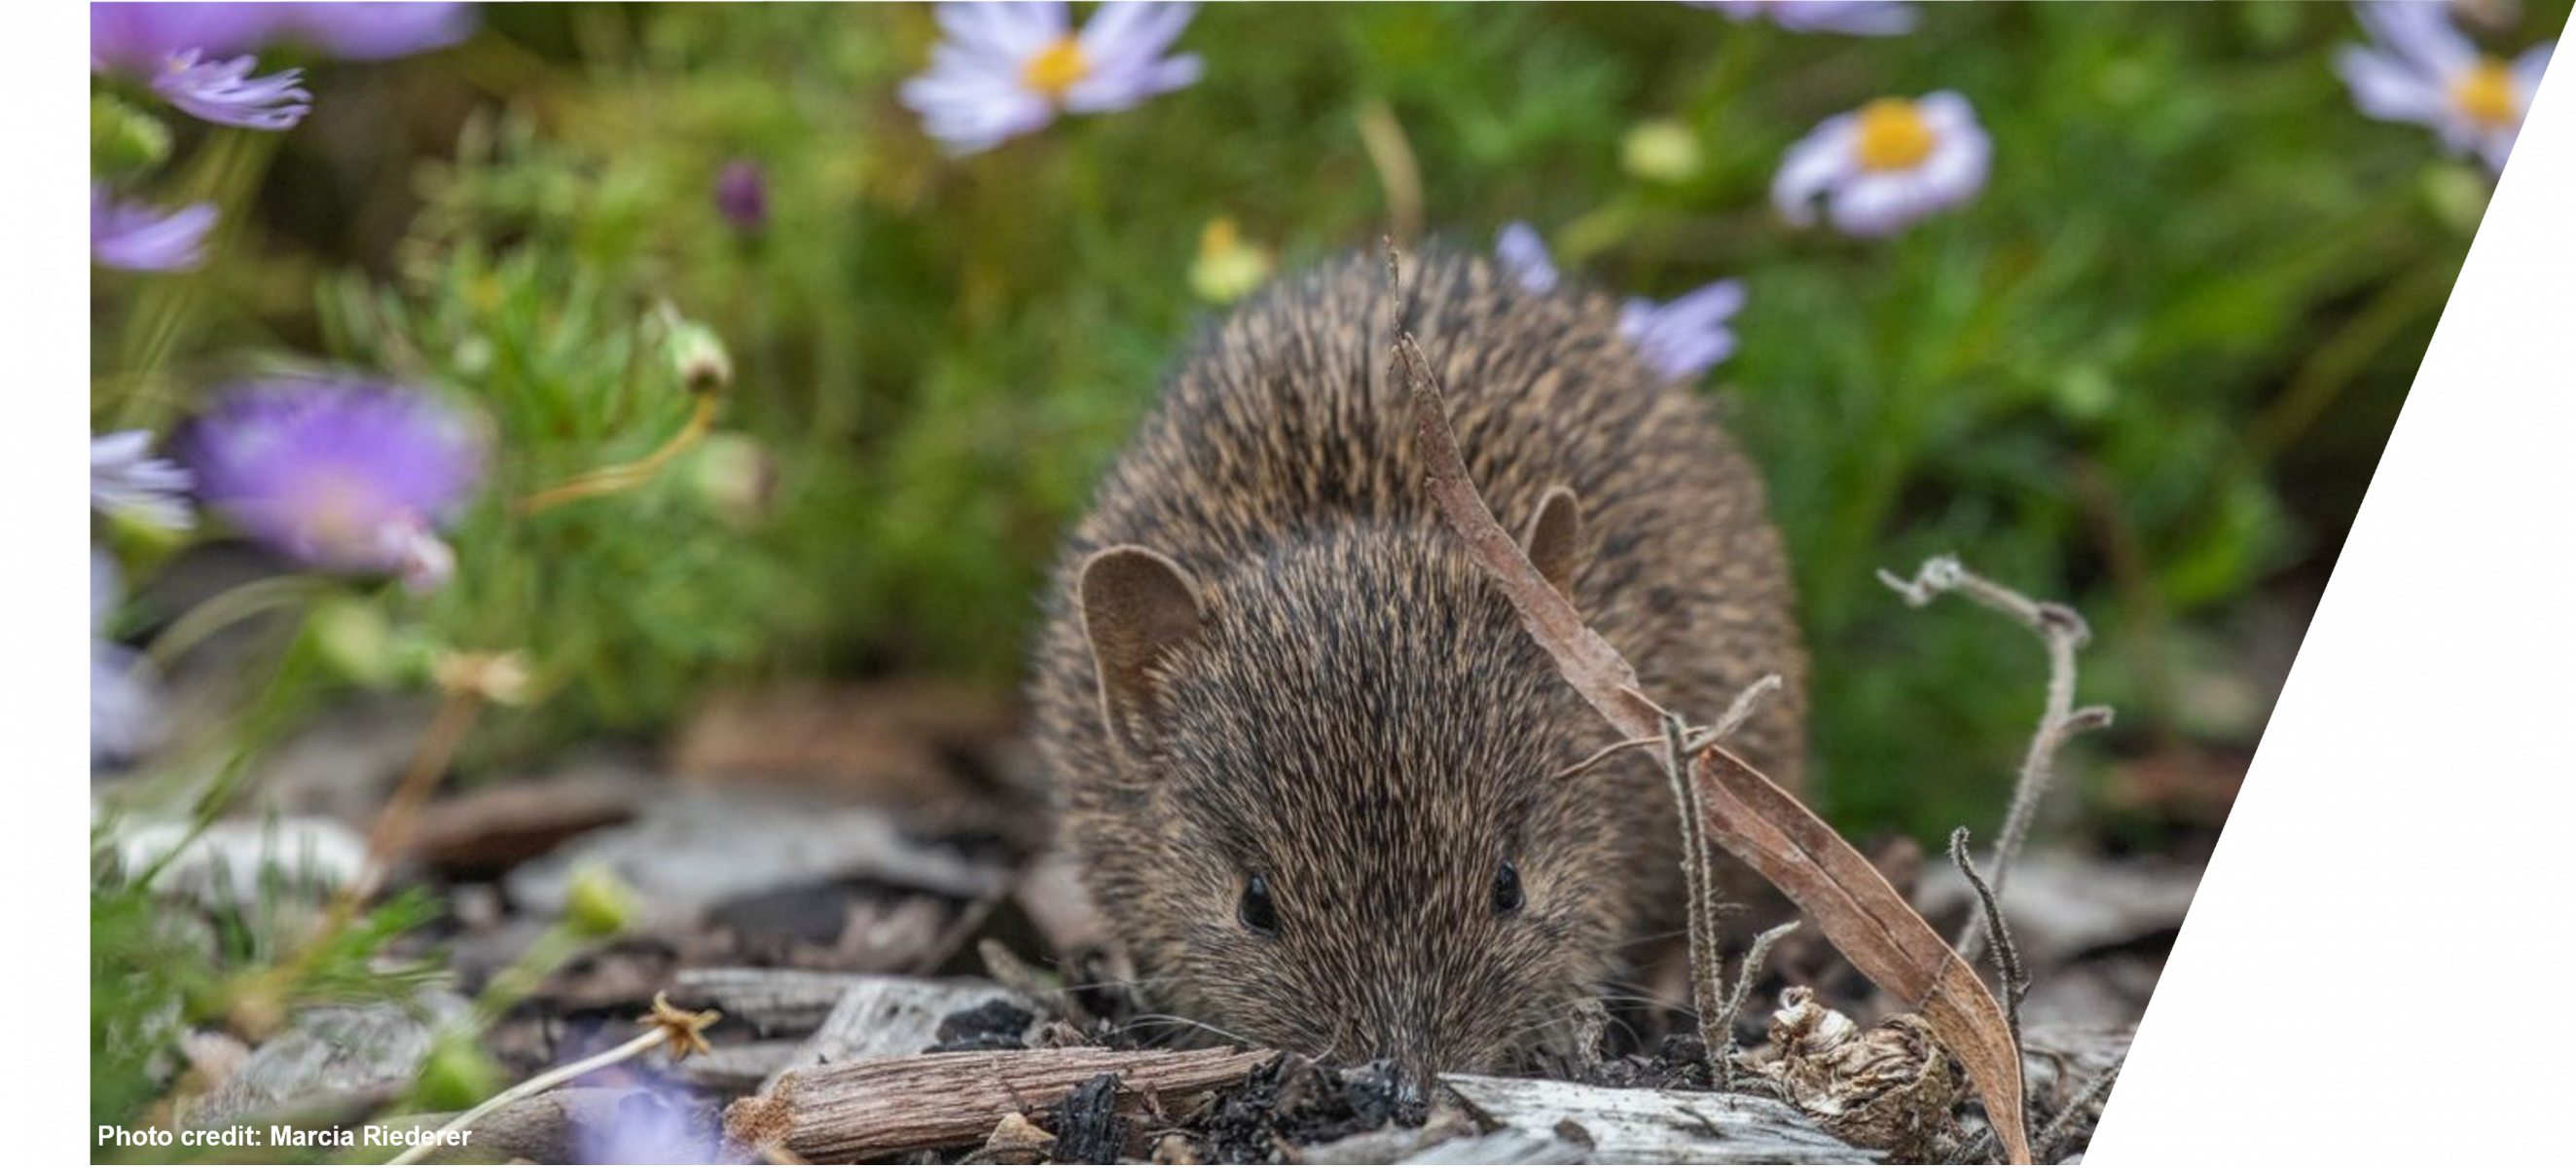 Southern brown bandicoot in flowers